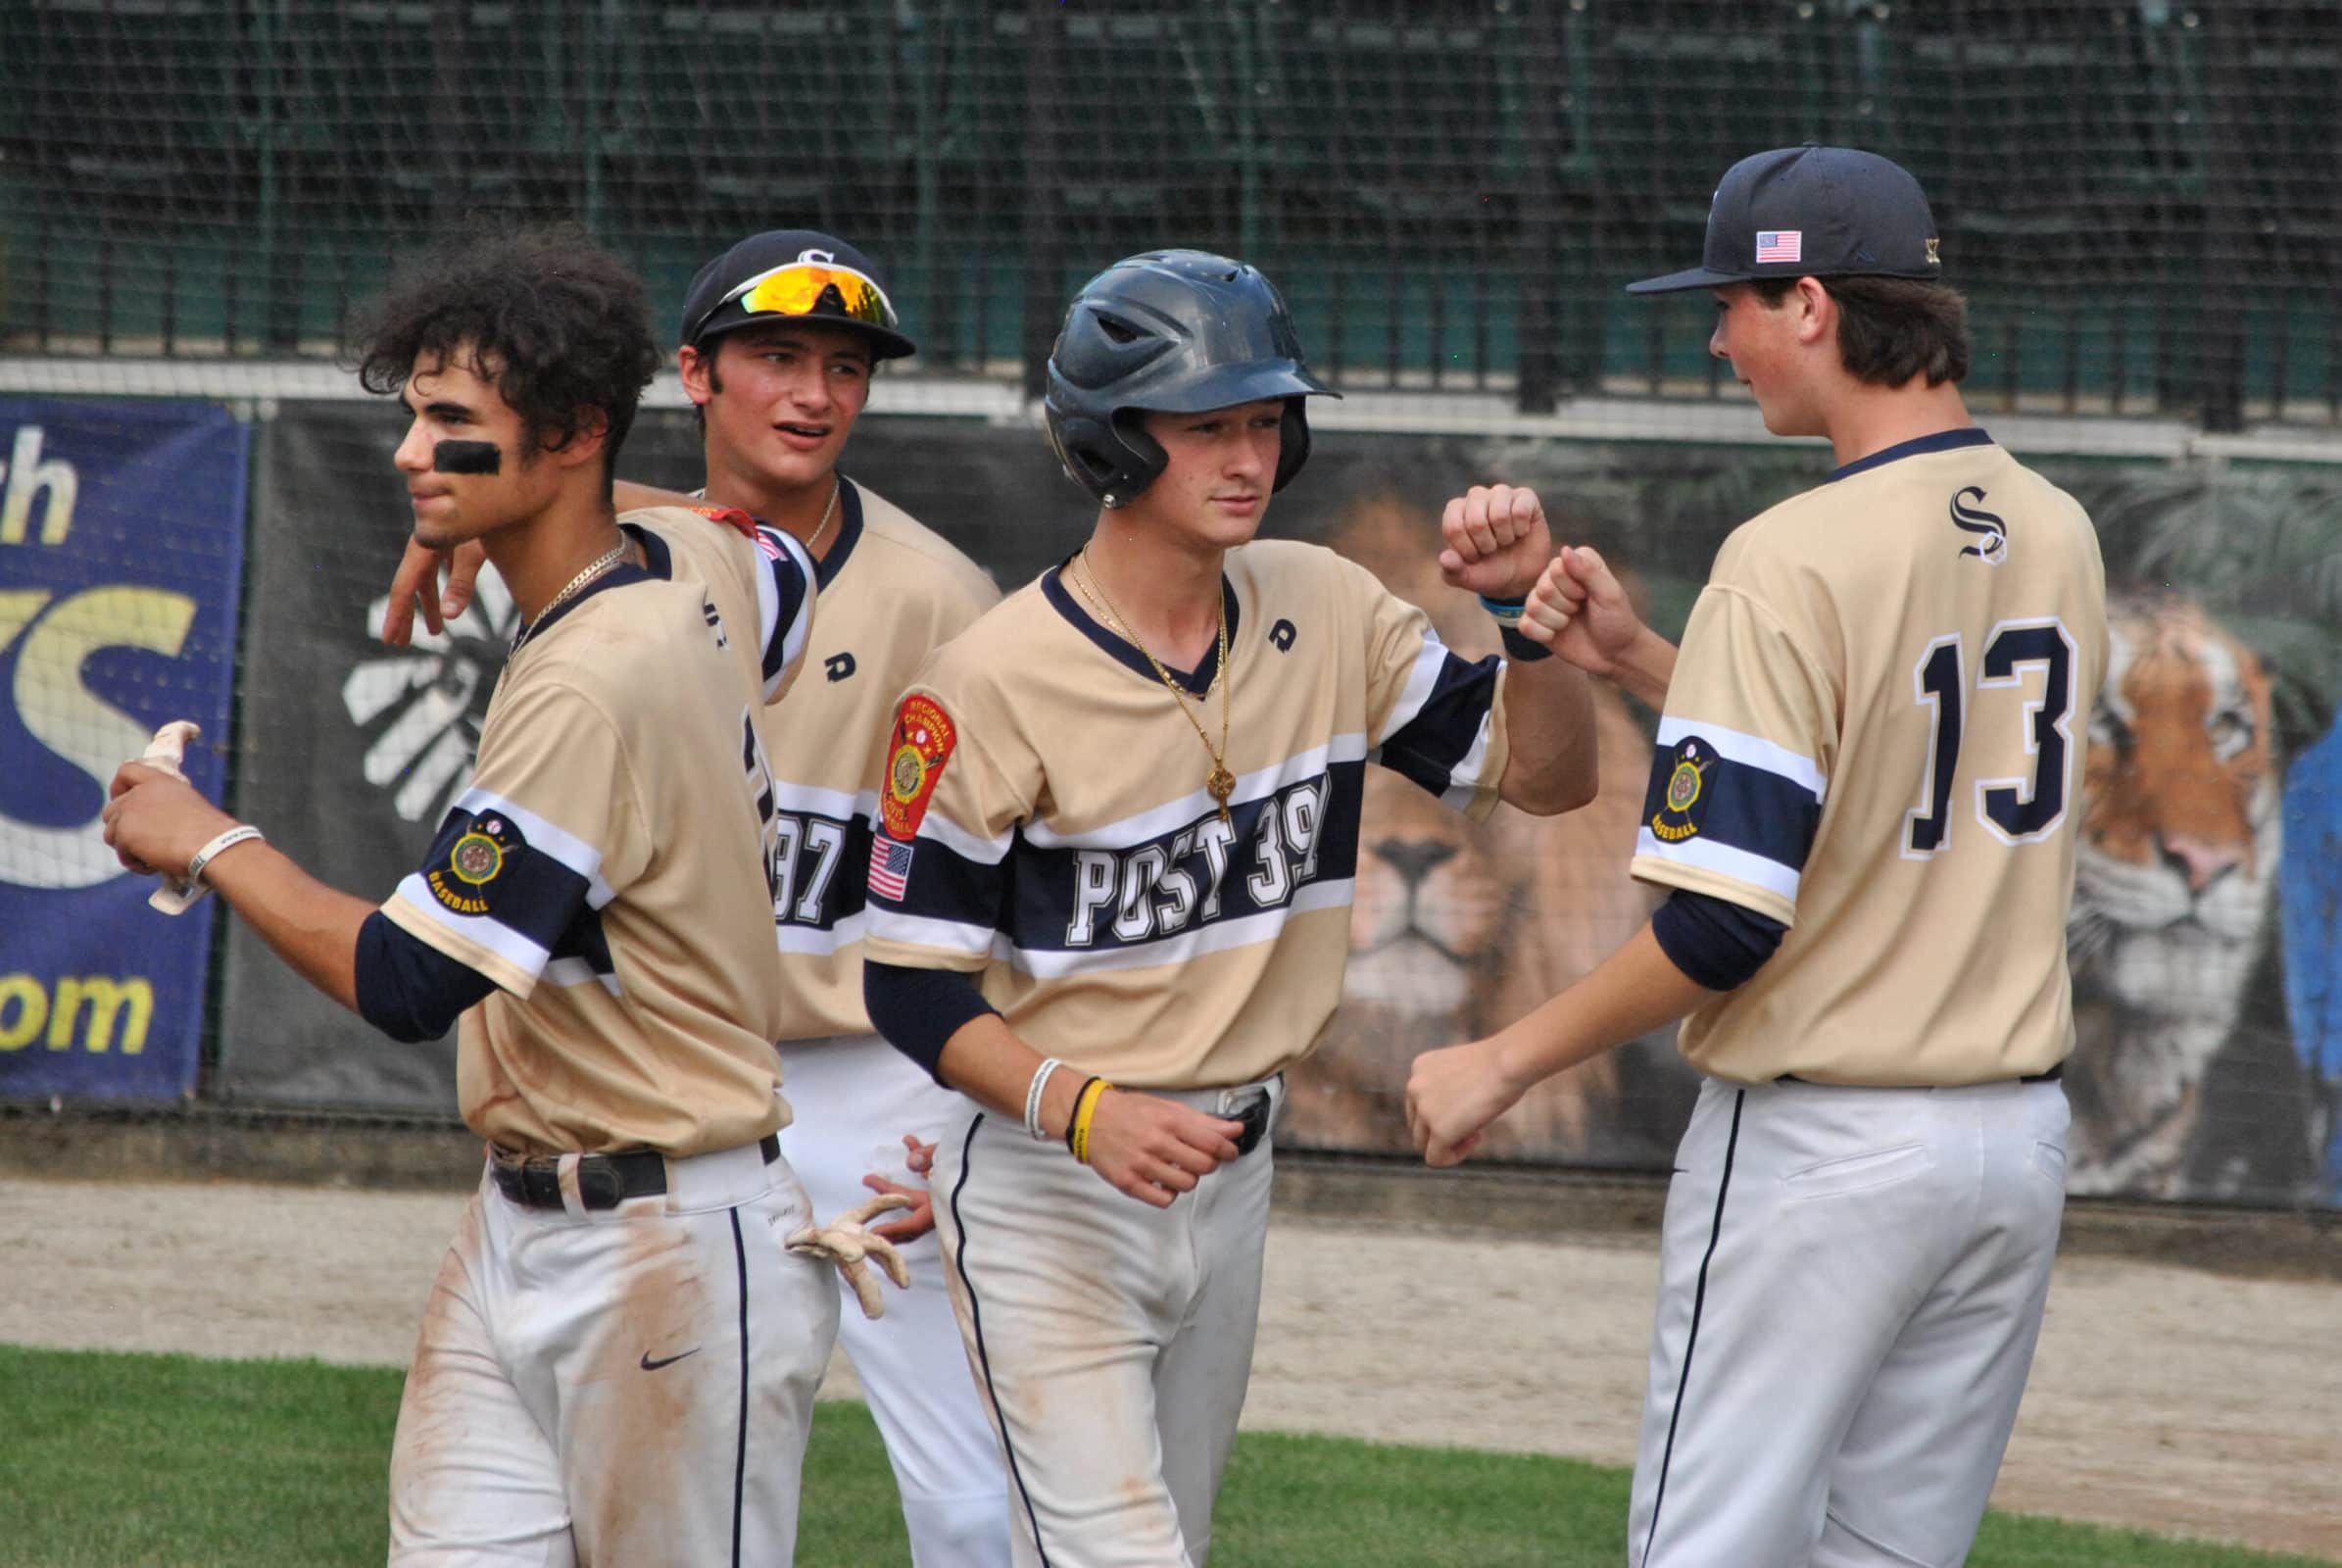 Shrewsbury players celebrate during a strong second inning for their team.